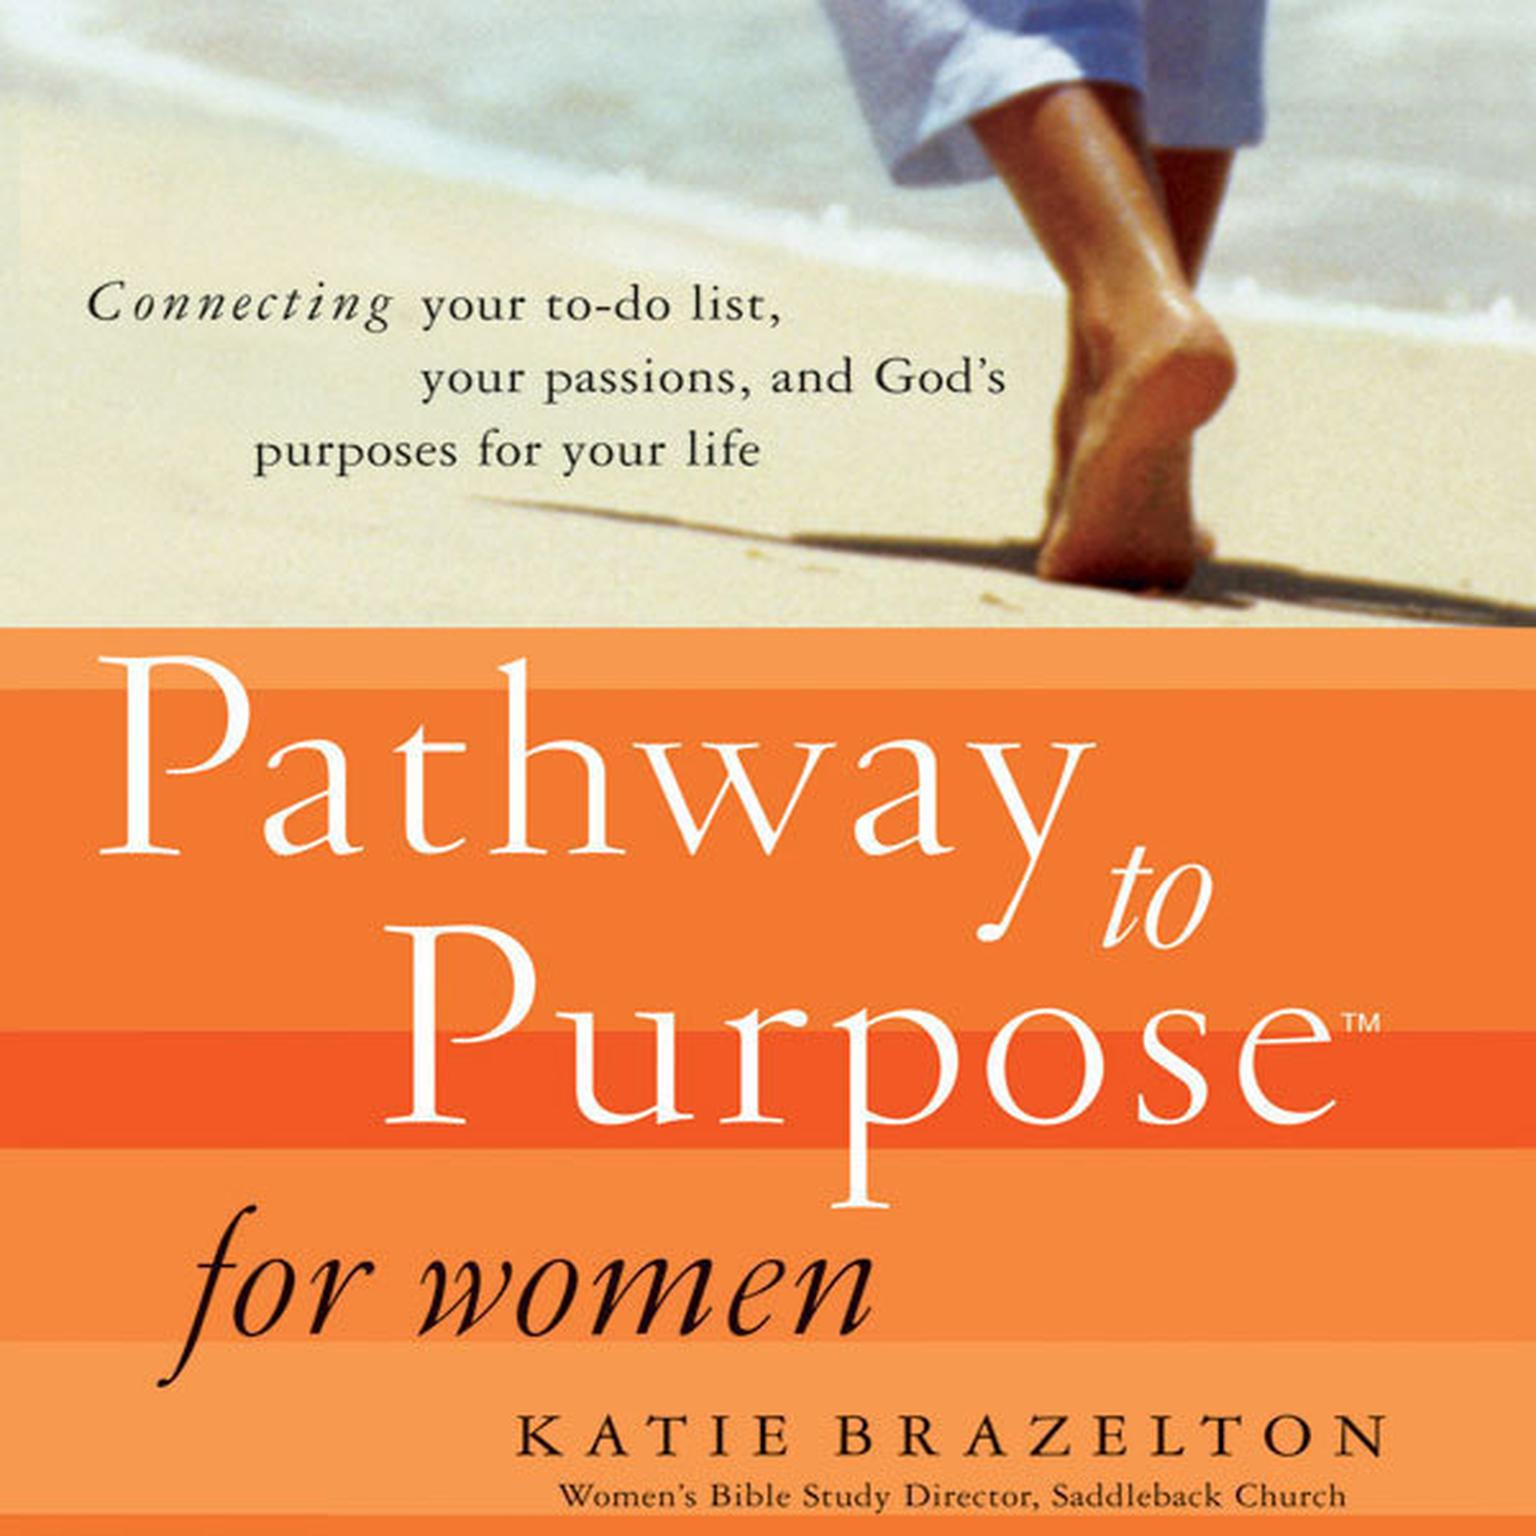 Pathway to Purpose for Women (Abridged): Connecting Your To-Do List, Your Passions, and God’s Purposes for Your Life Audiobook, by Katie Brazelton